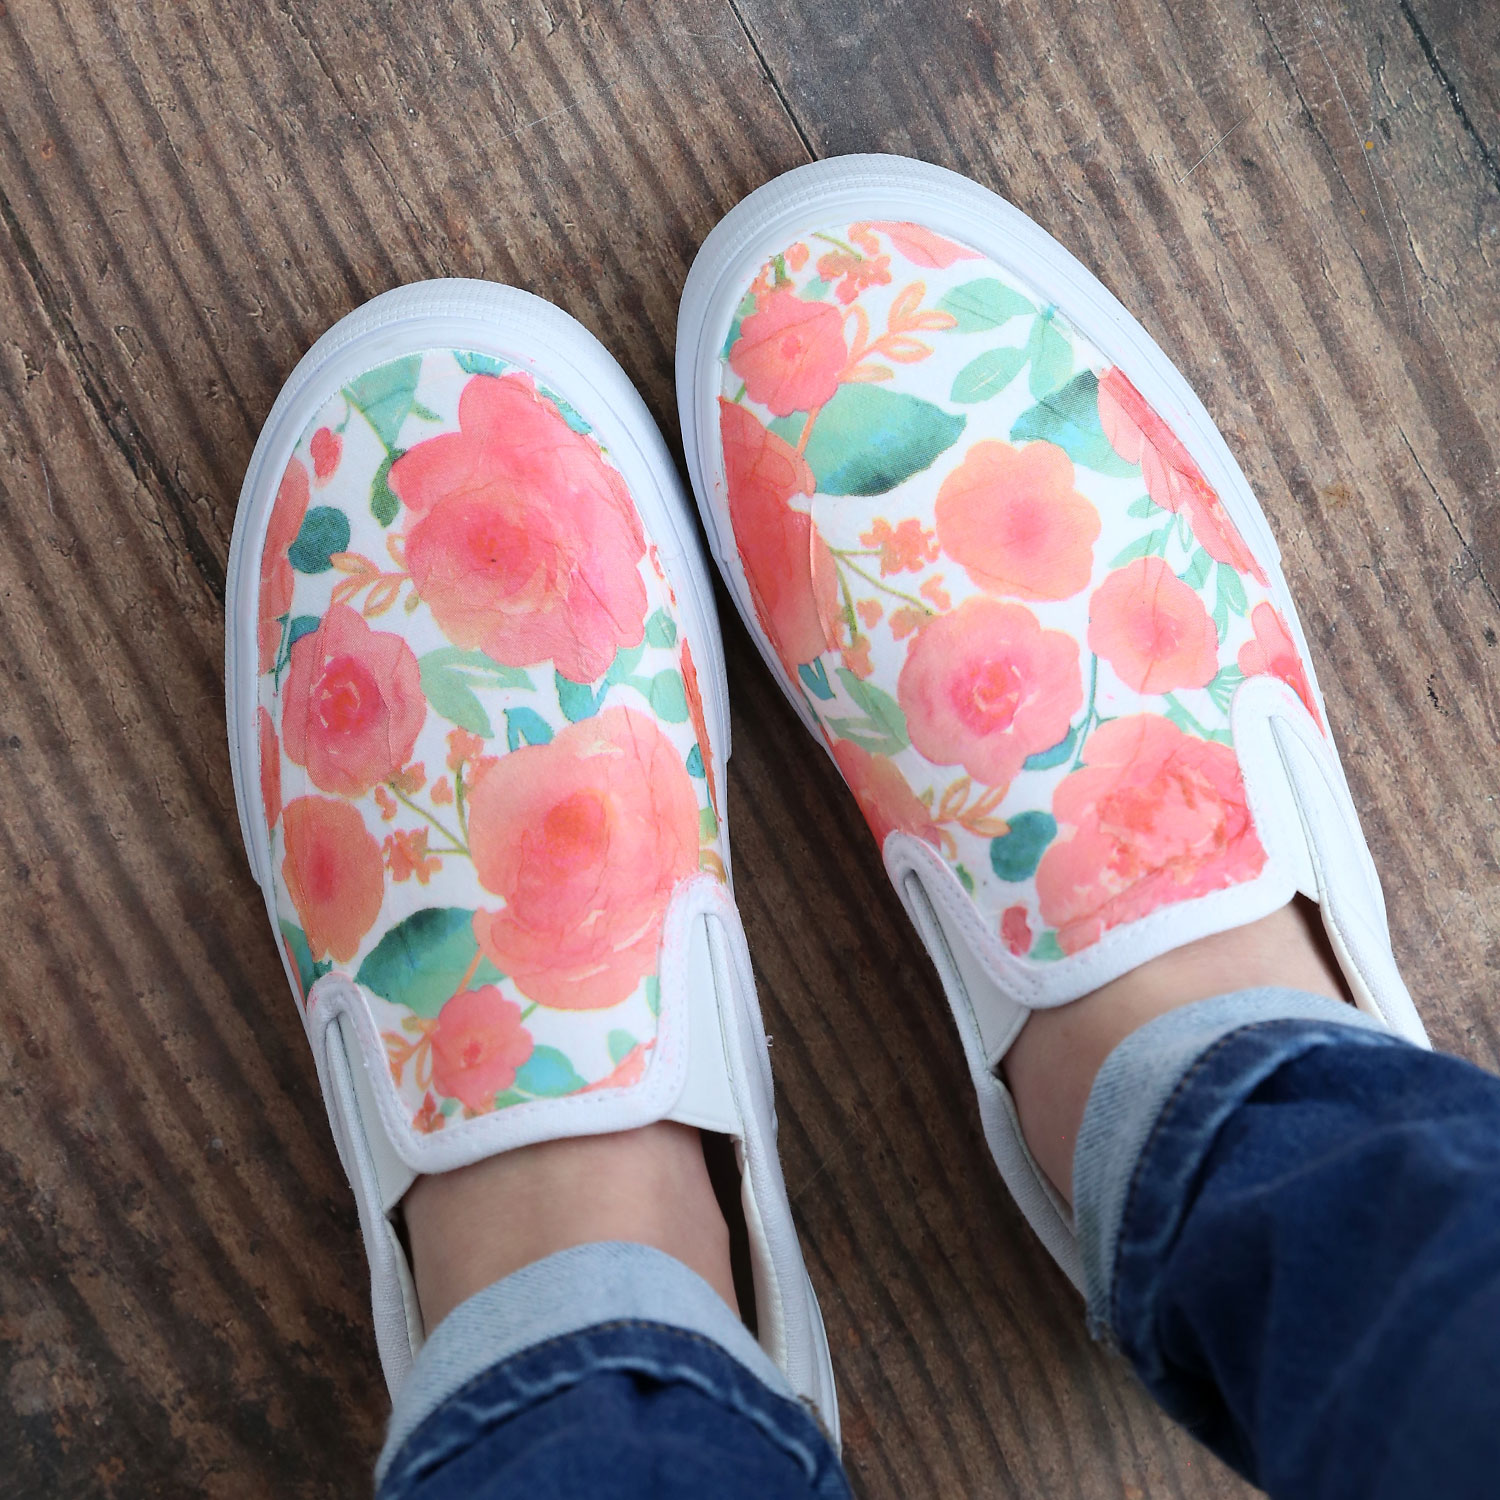 Pair of floral shoes.